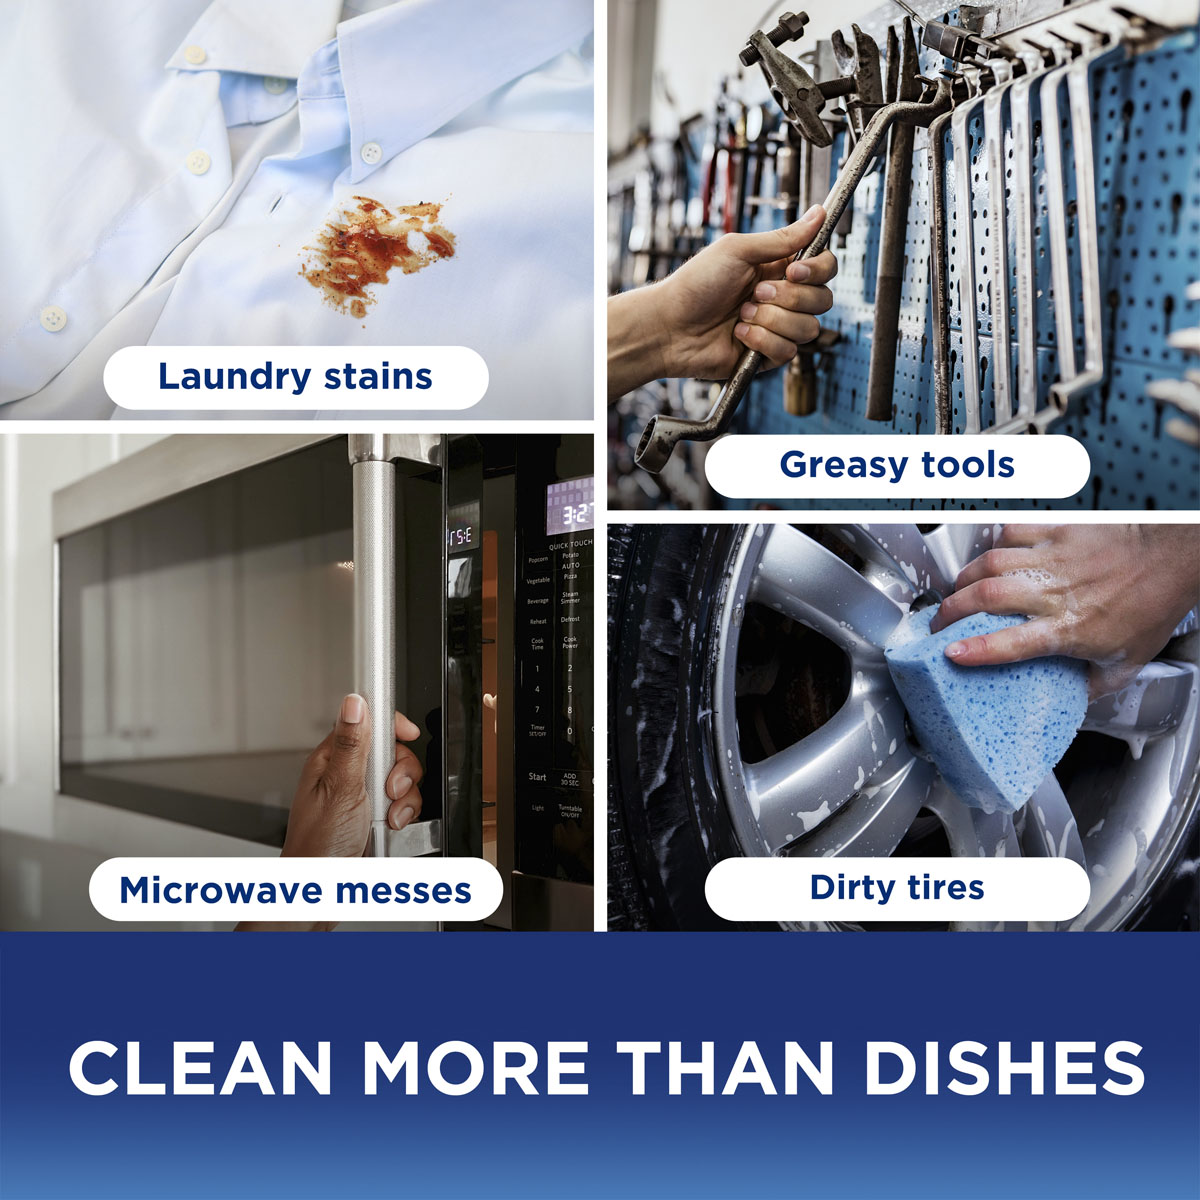 Clean More Than Dishes